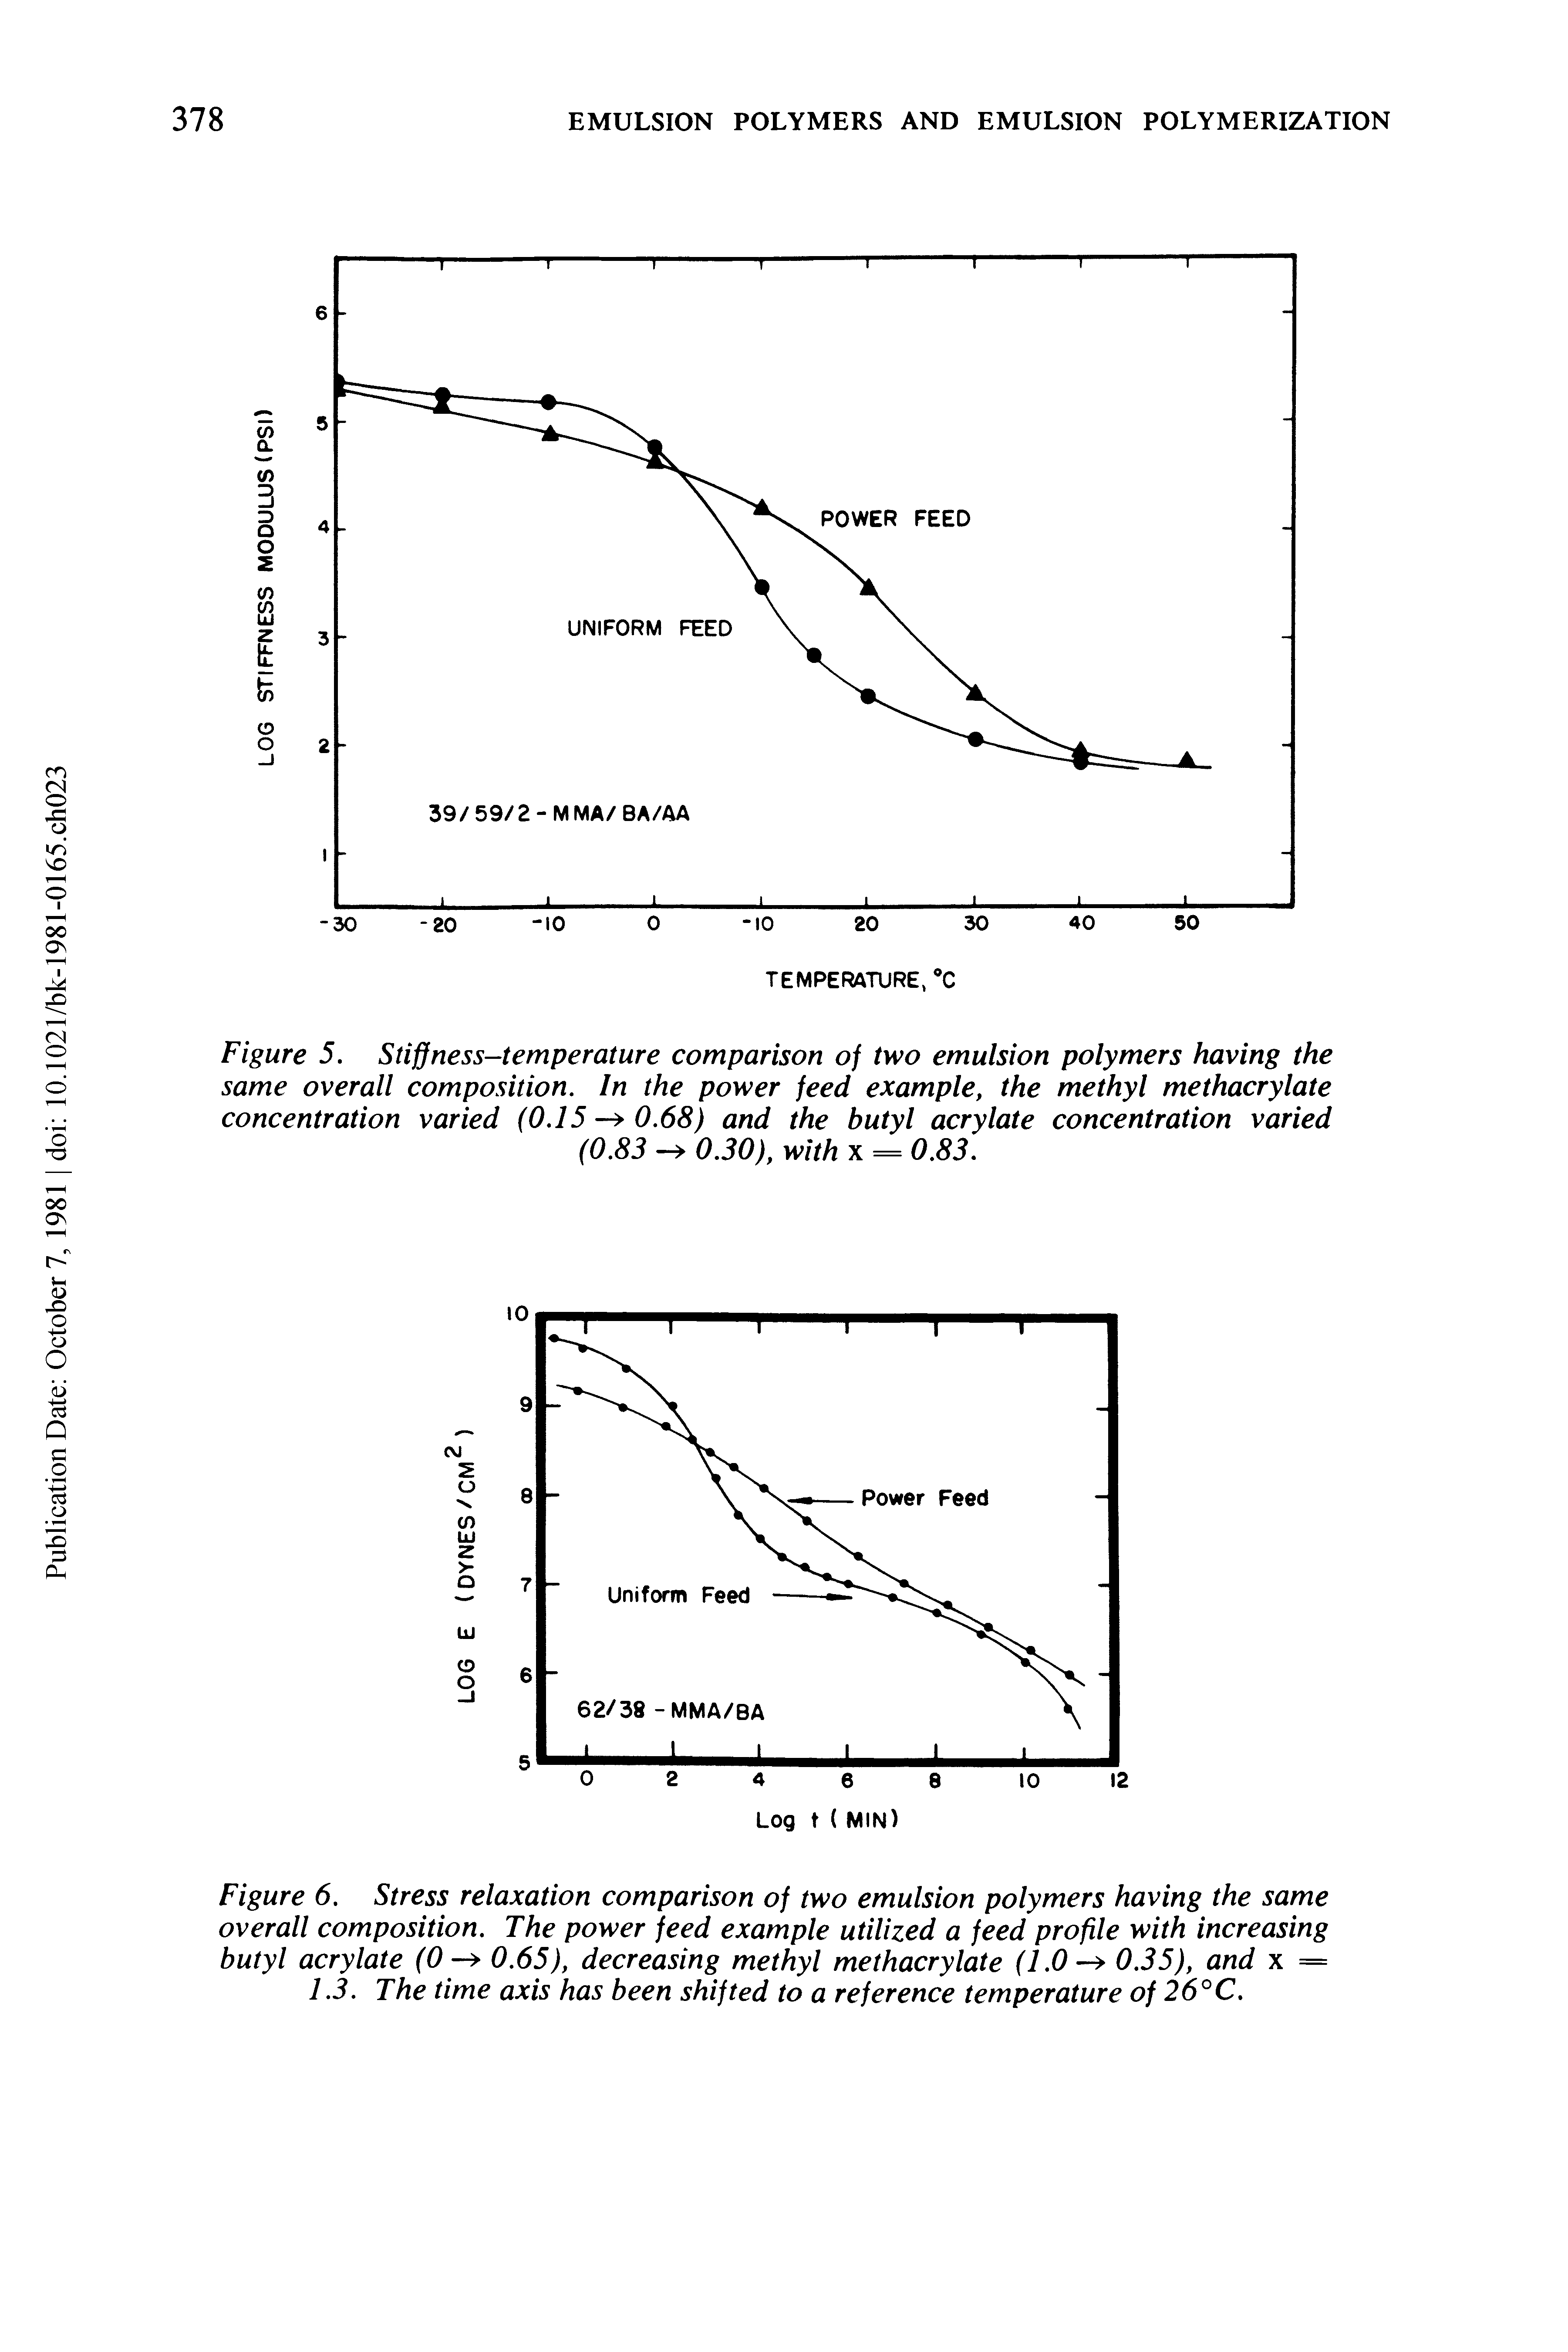 Figure 5. Stiffness-temperature comparison of two emulsion polymers having the same overall composition. In the power feed example, the methyl methacrylate concentration varied (0.15 - 0.68) and the butyl acrylate concentration varied (0.83 0.30), with x = 0.83.